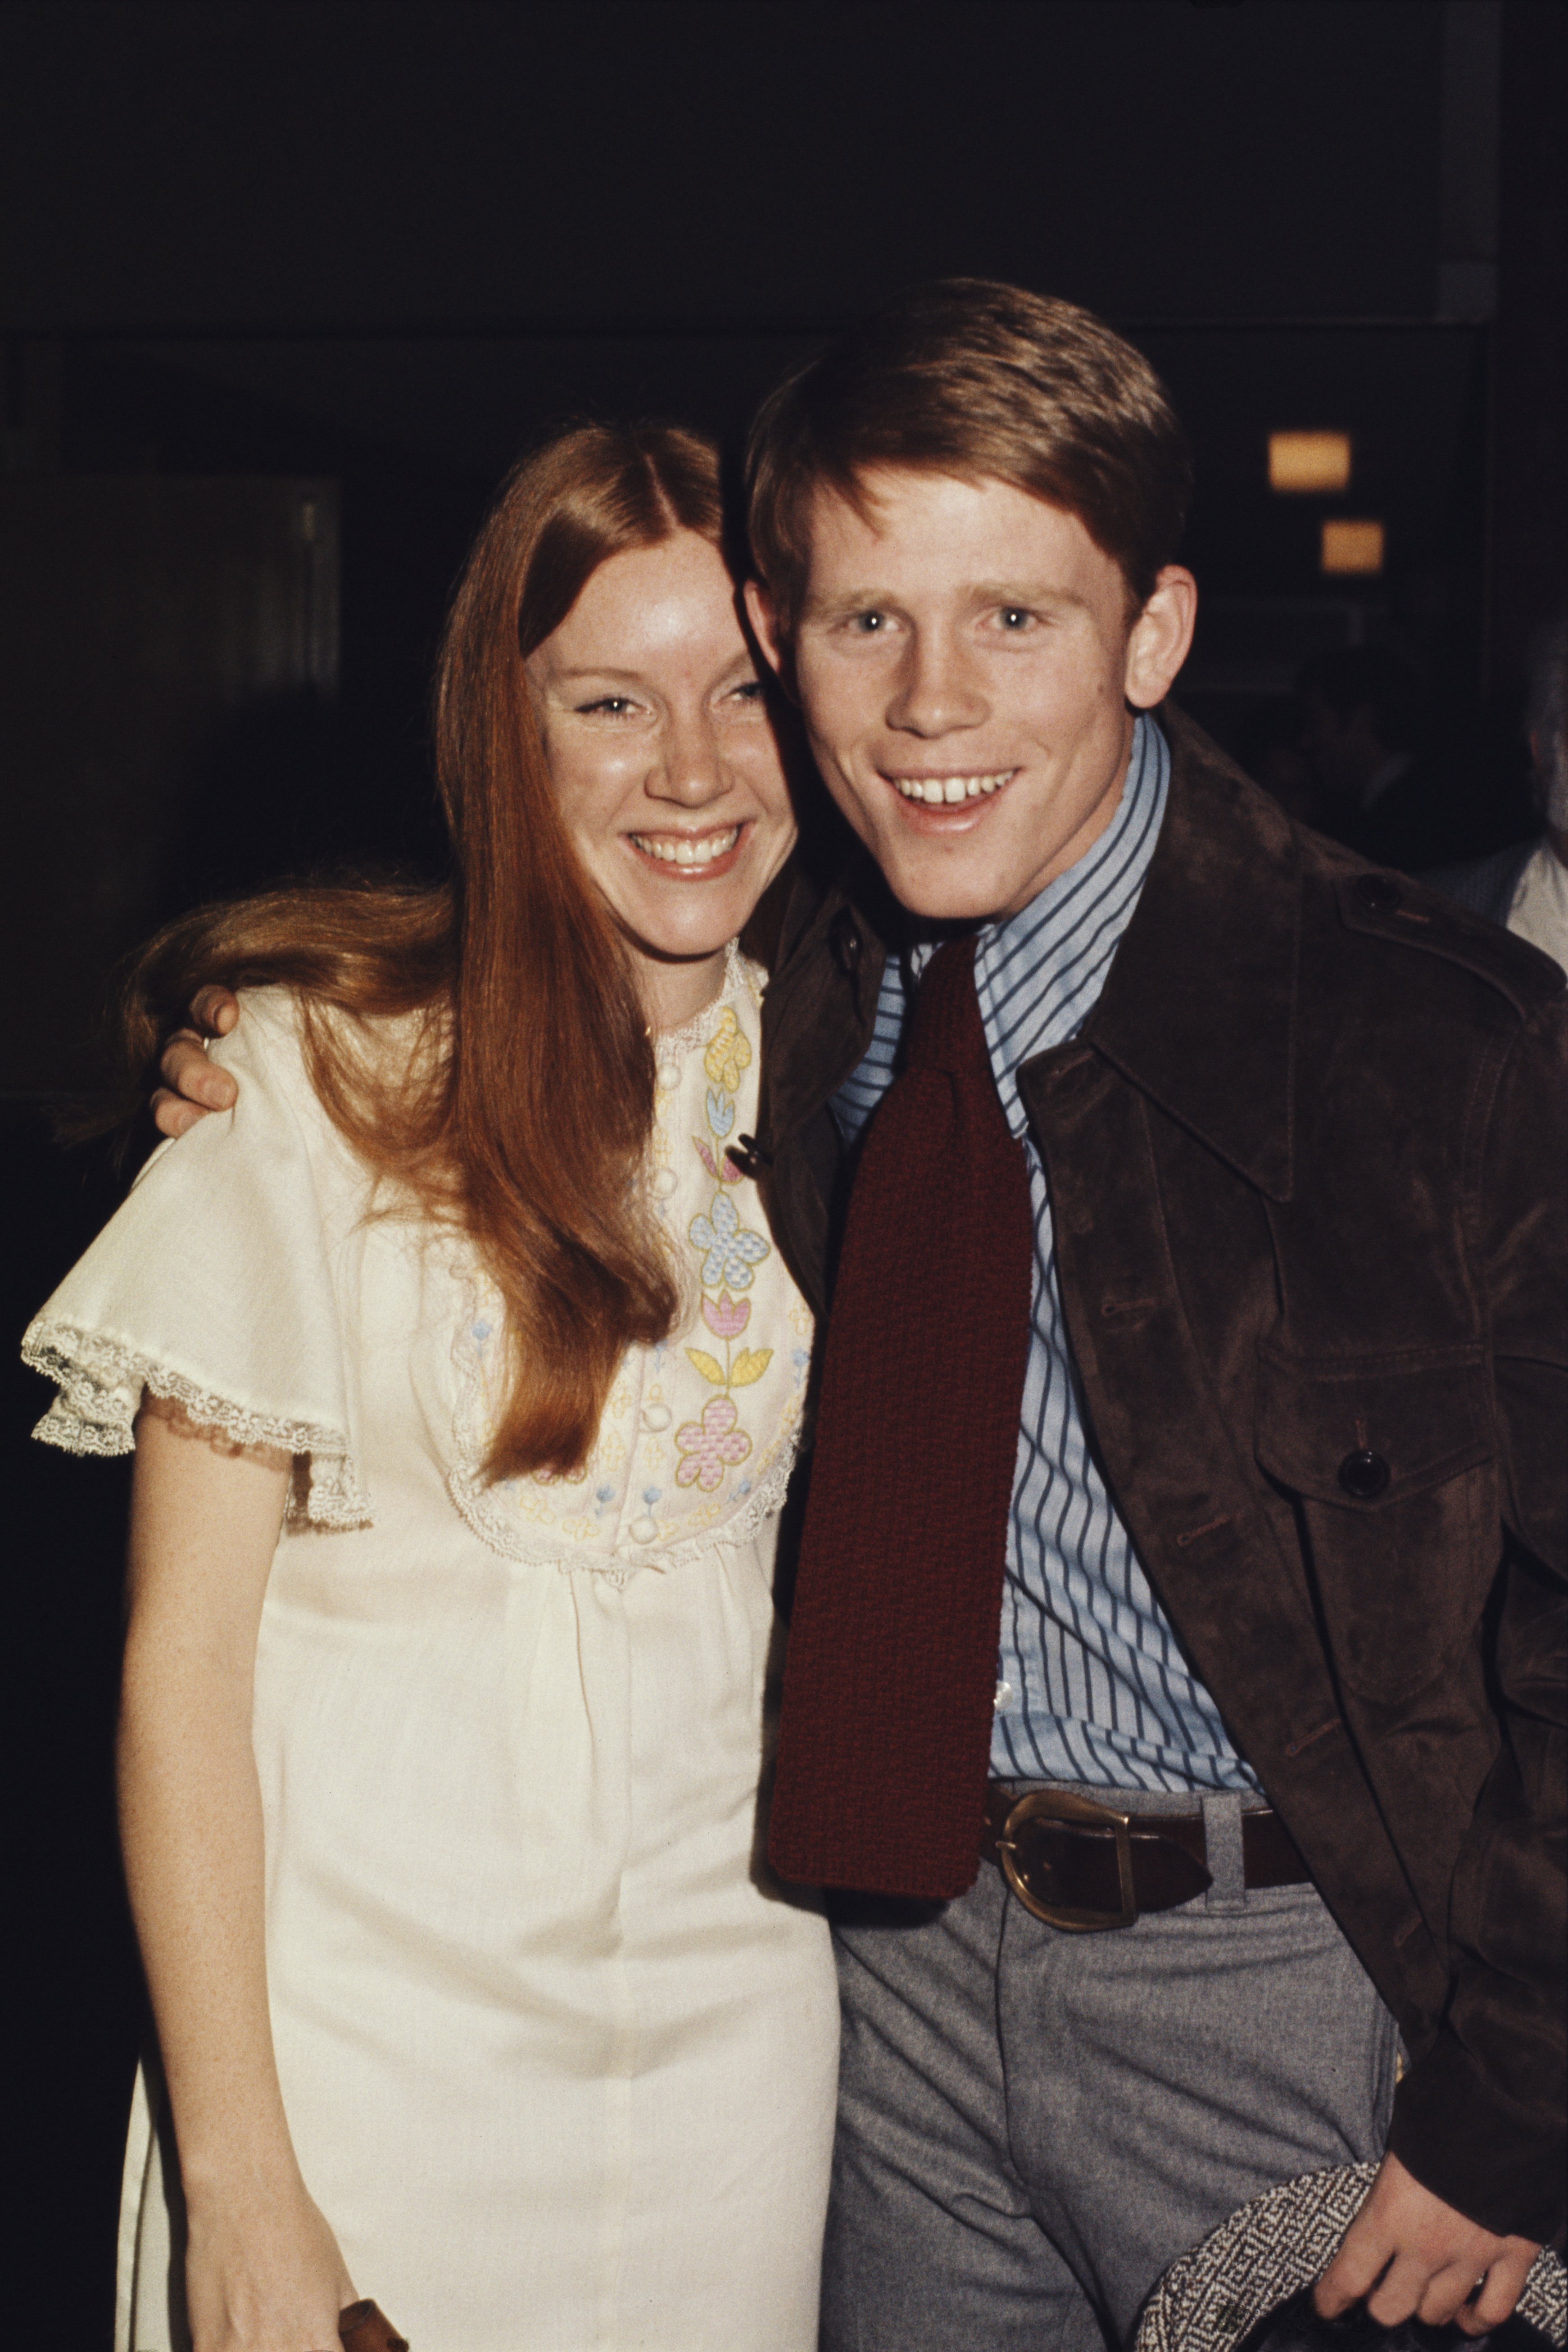 Ron Howard and his wife Cheryl Howard photographed in circa 1978. | Source: Getty Images